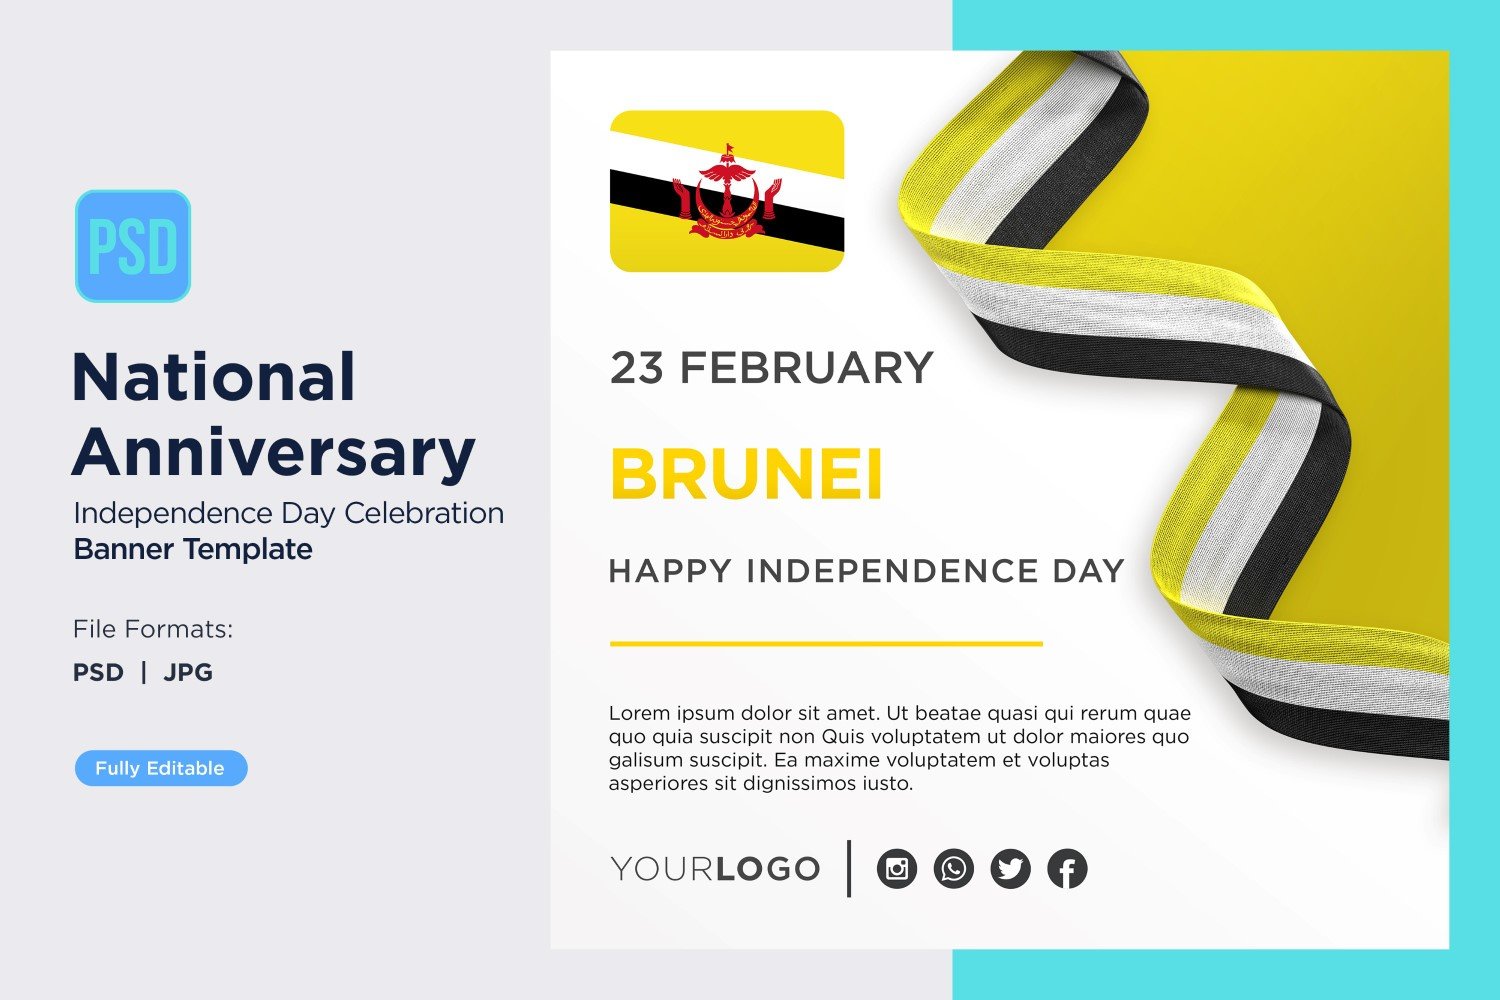 Template #402790 Day Celebration Webdesign Template - Logo template Preview